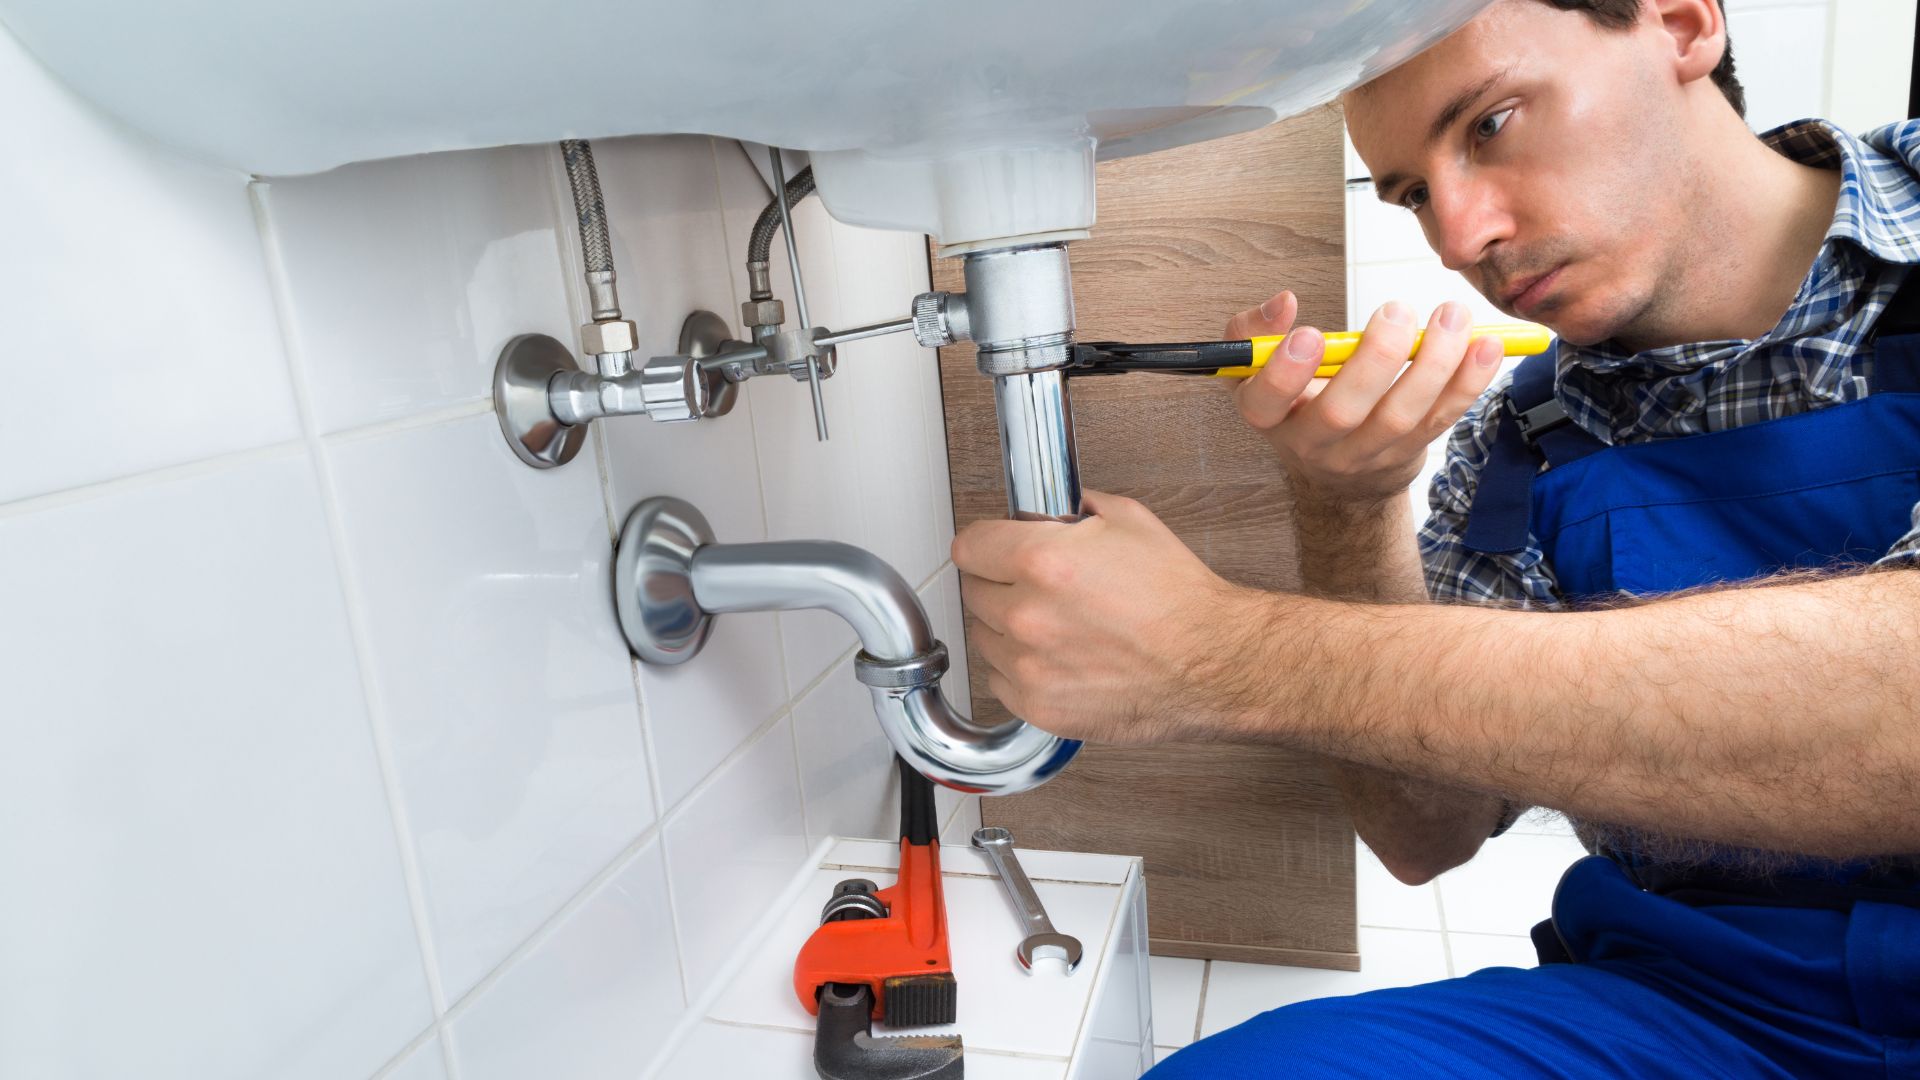 Reasons to Choose CAN Plumbing & Drainage for Your Plumbing Needs in the Vicinity of Mississauga, Ontario, with Expert Plumbers.